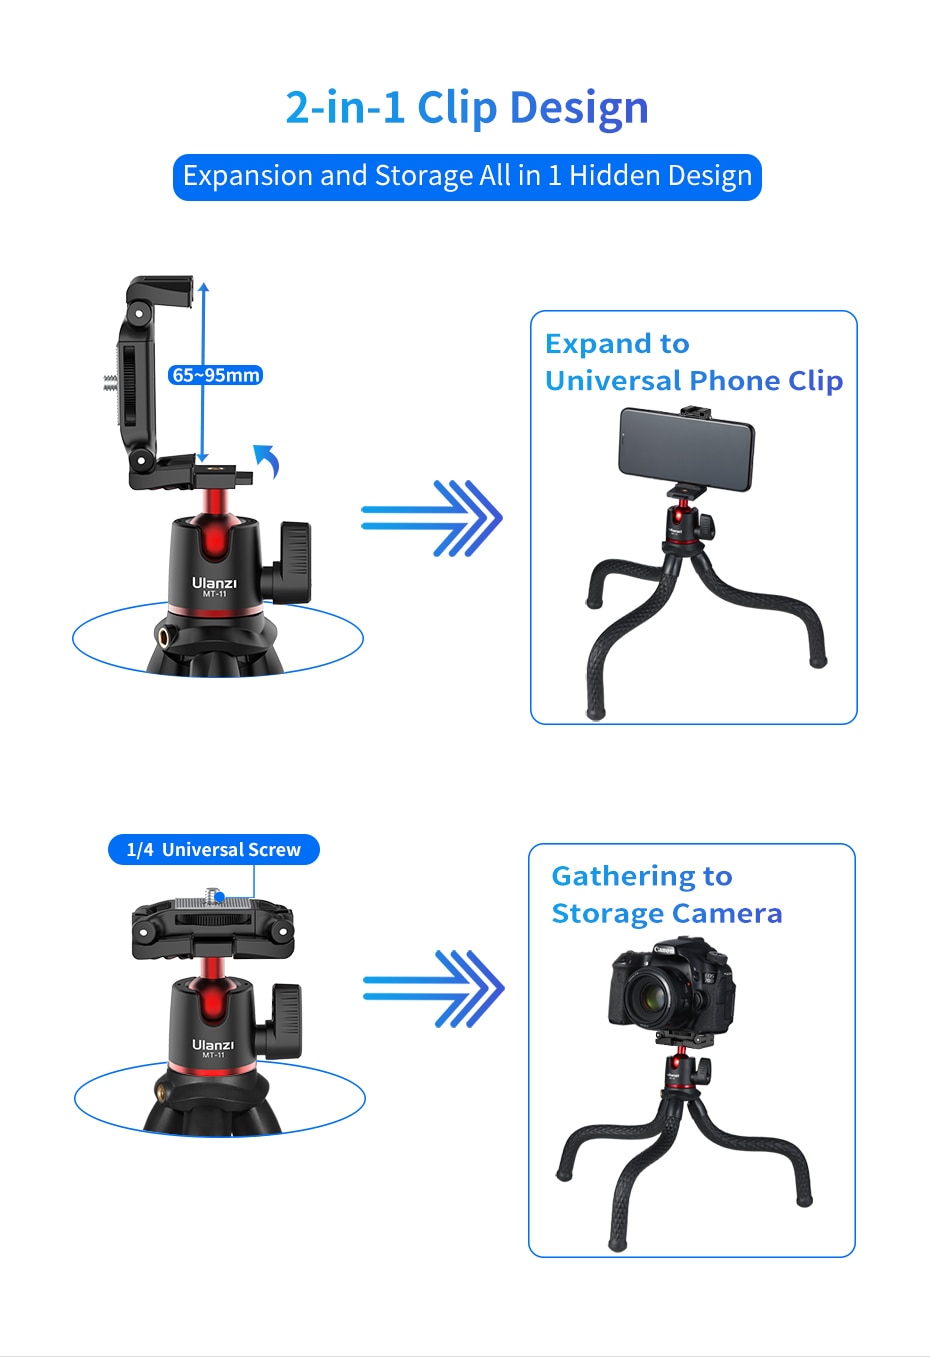 Octopus Flexible Tripod For Phone and Camera